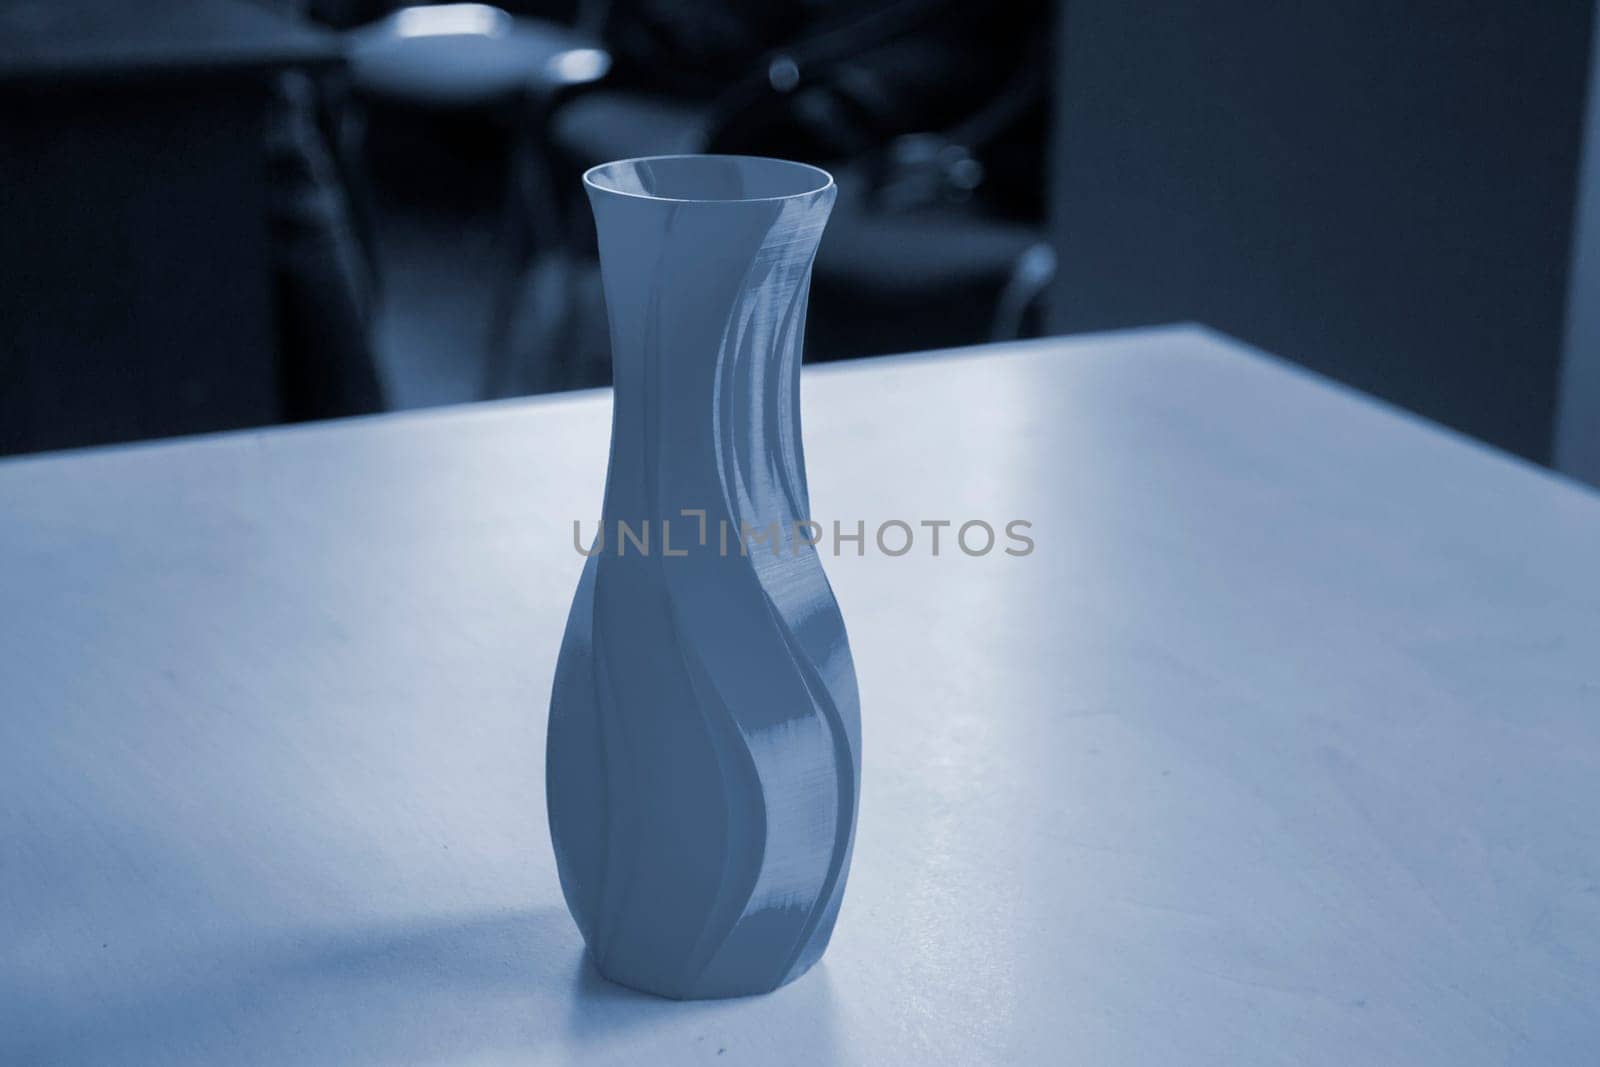 Object in the form of a vase printed on a 3D printer. Three-dimensional model printed on a 3D printer from molten plastic of red color. Concept 3D Printing. FDM 3D Printing technology